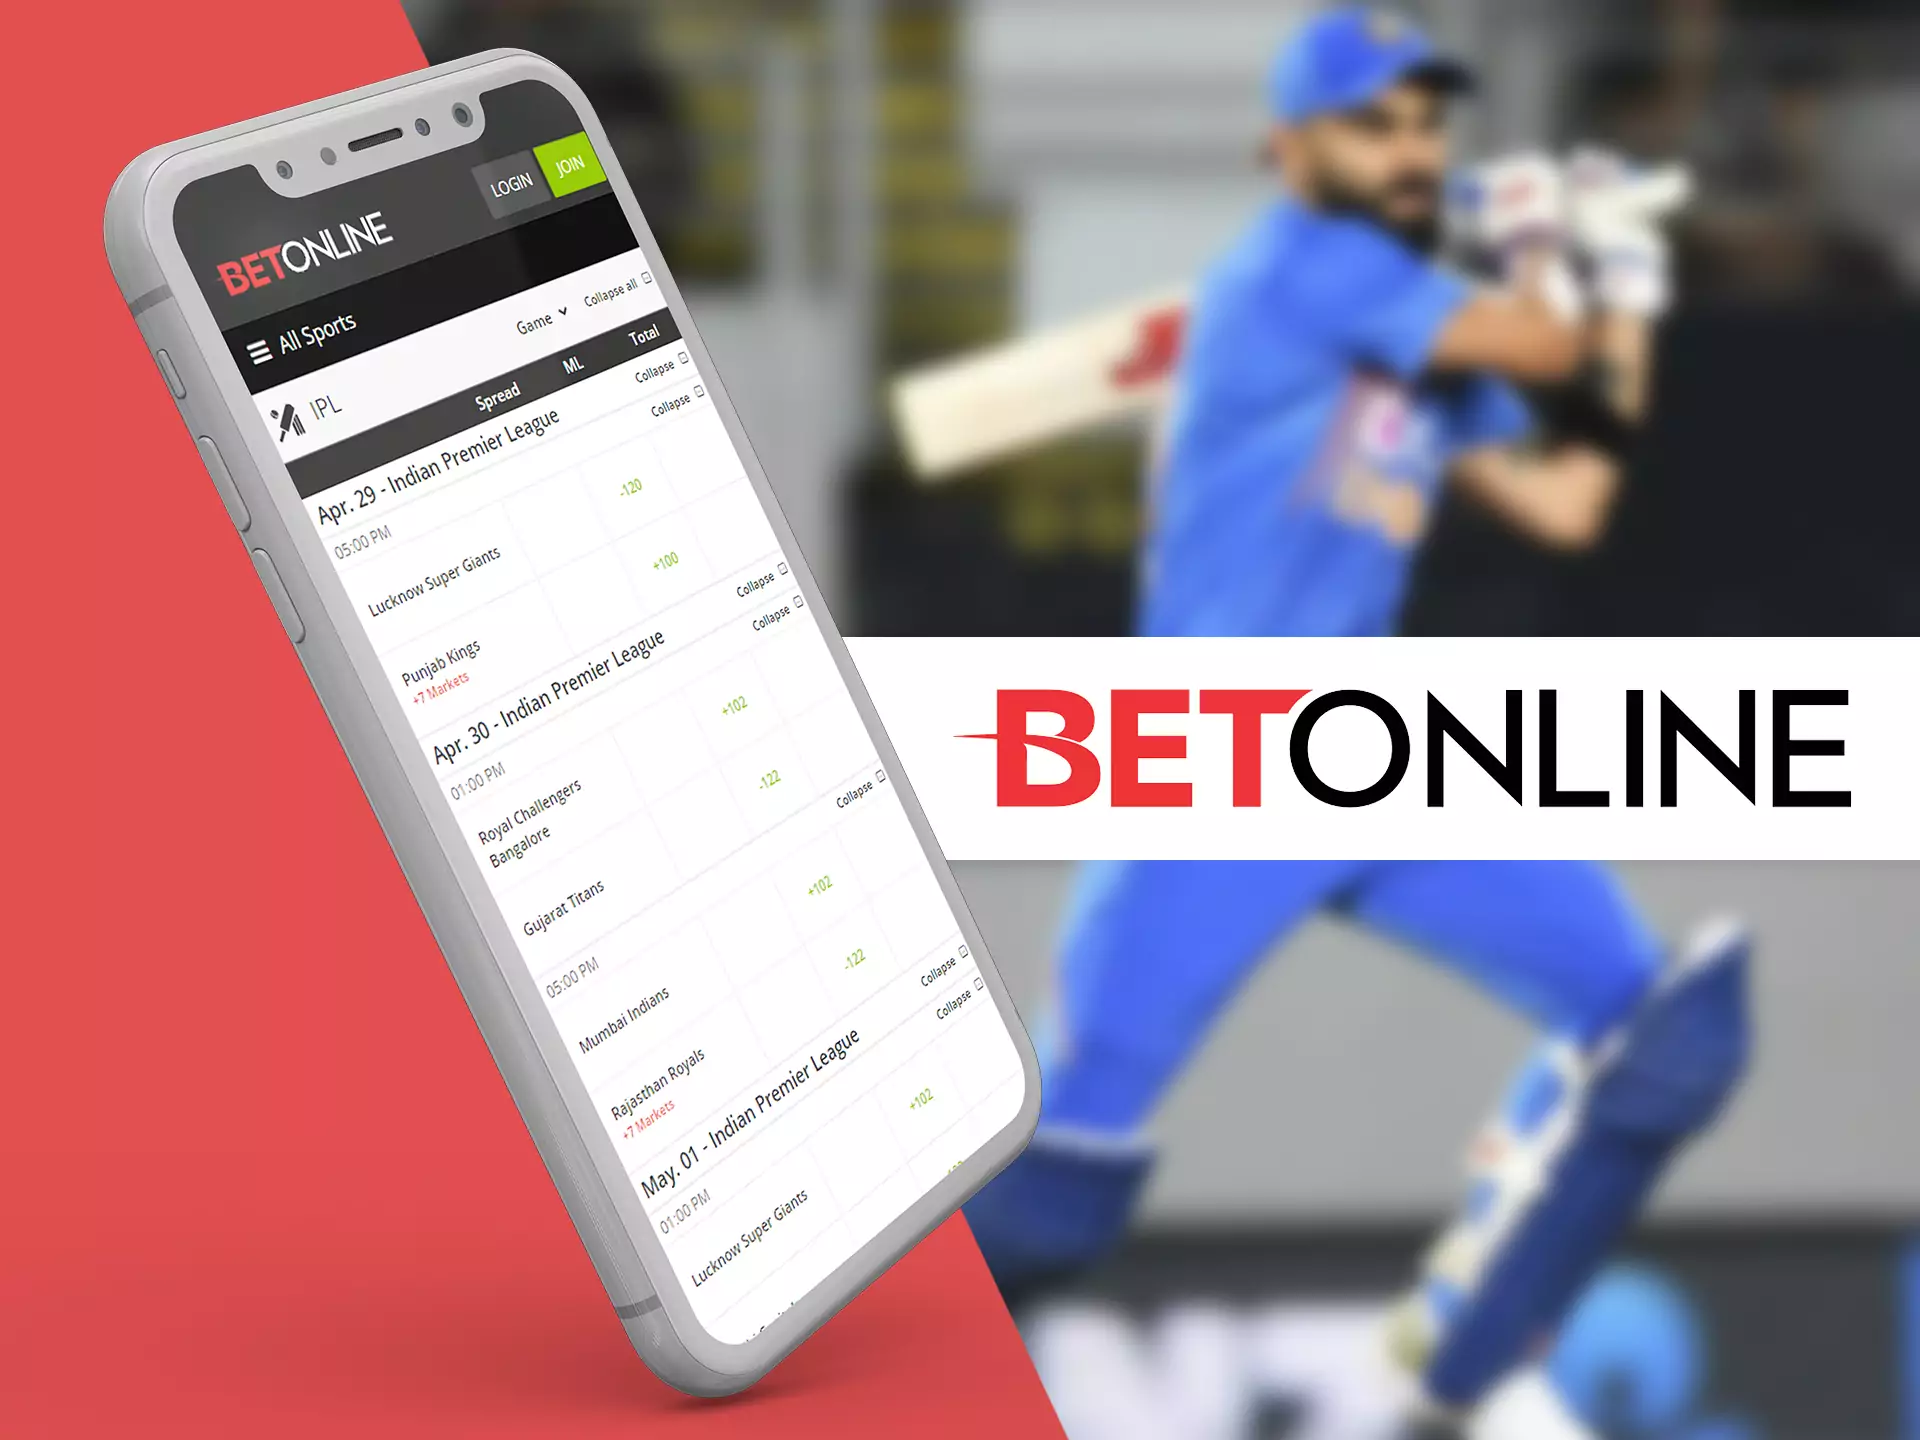 You can bet on dozens of sports in the Betonline app.